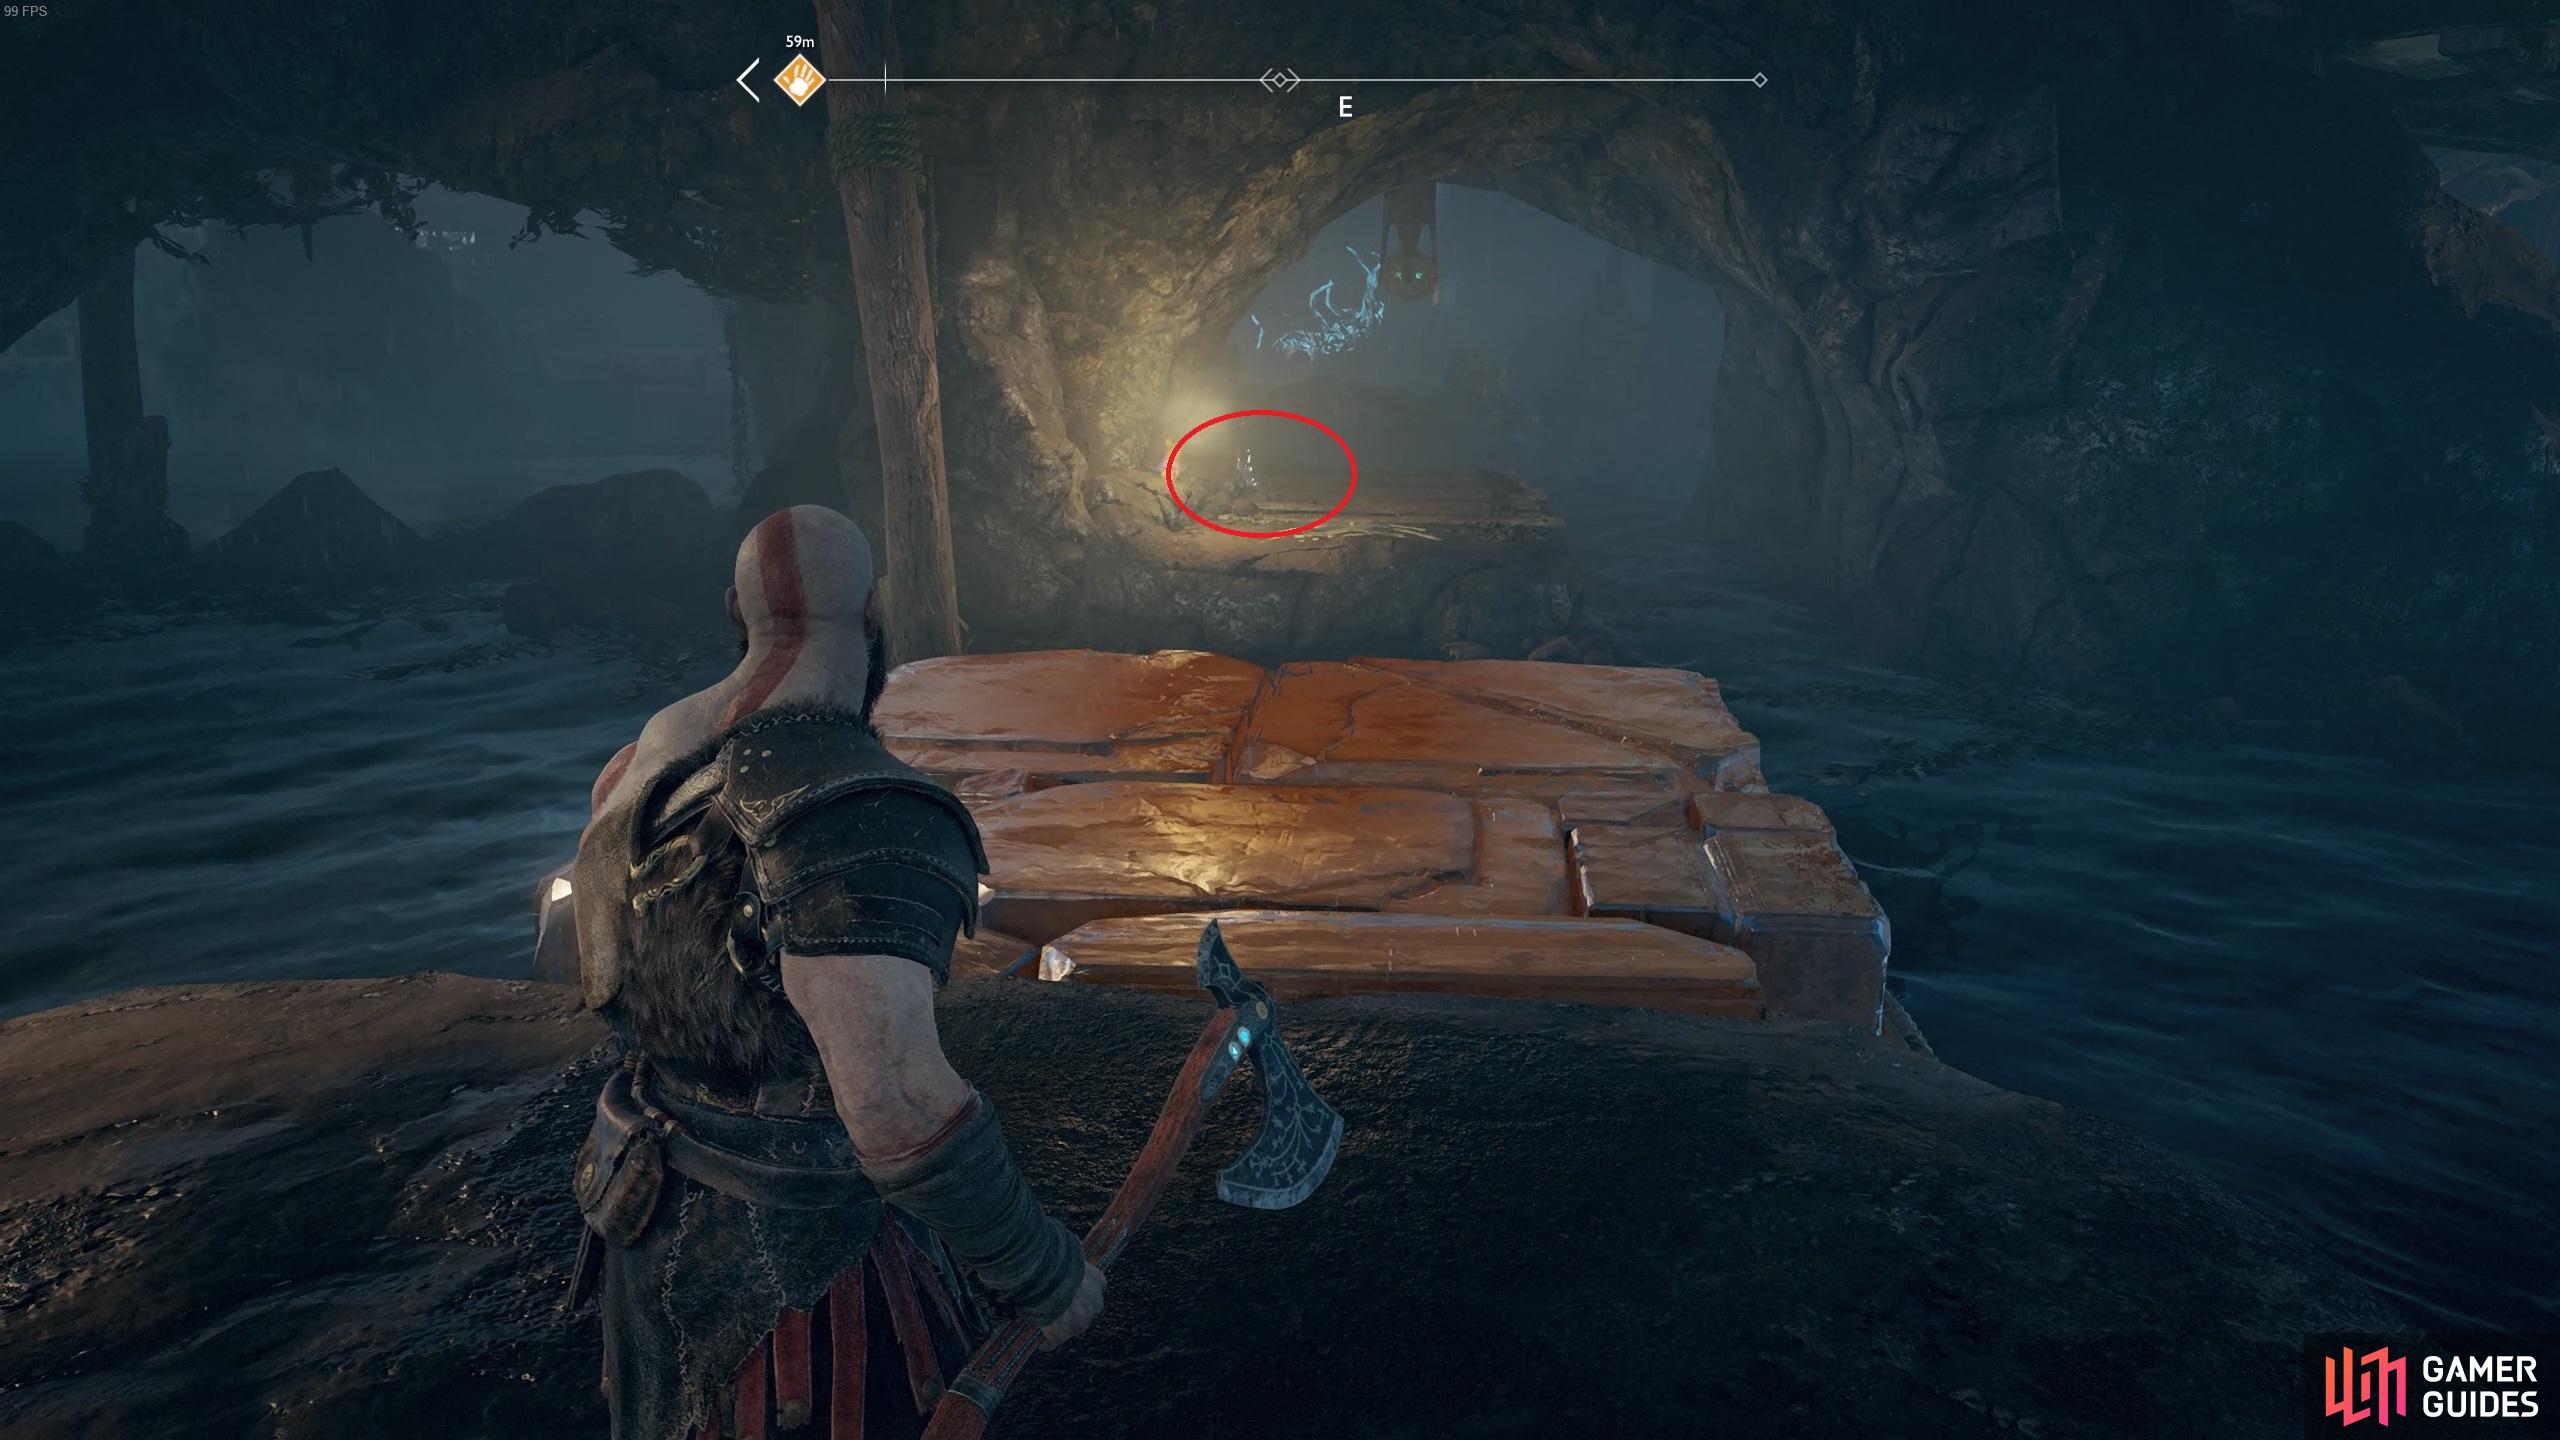 Once the cart is in the water you can walk over it to access the artefact.